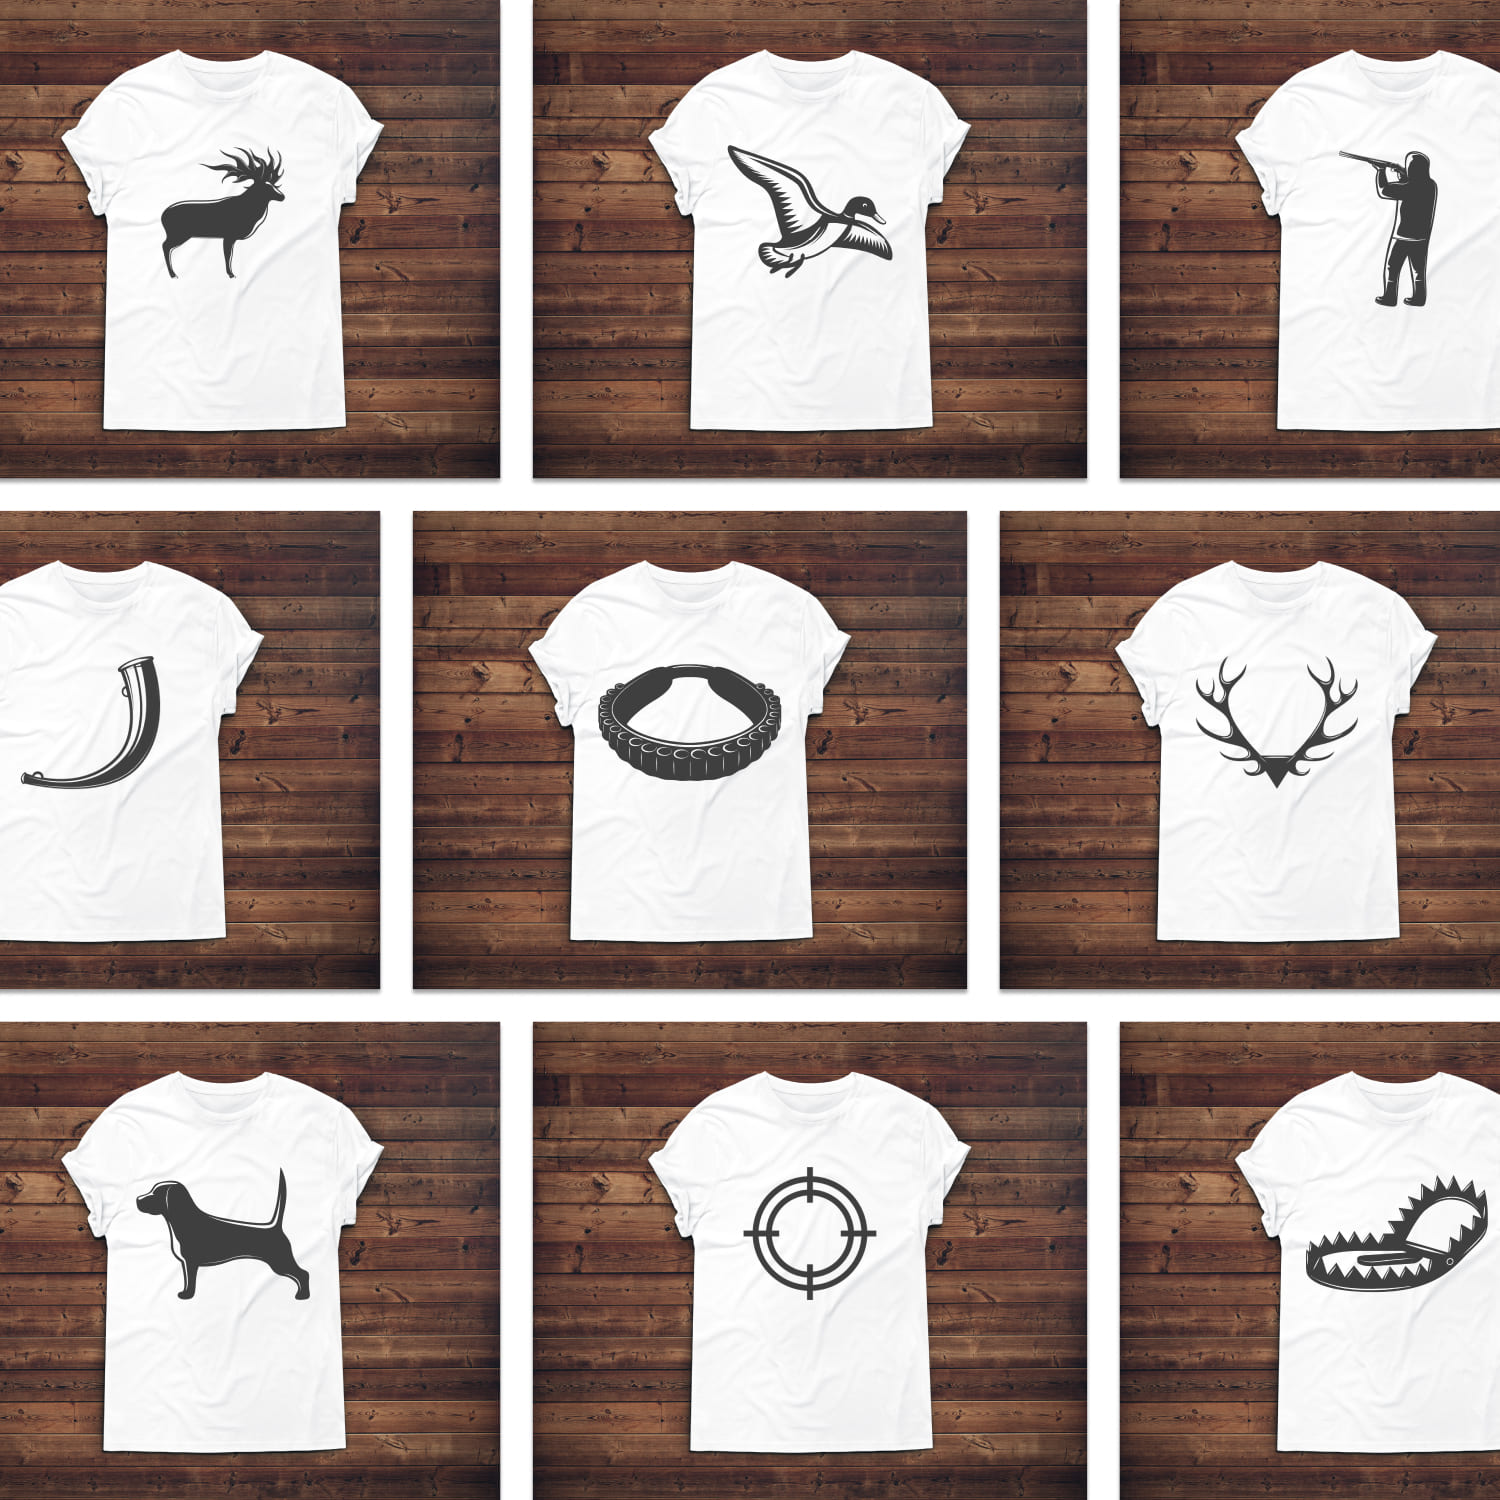 A selection of images of T-shirts with irresistible prints of silhouettes of duck hunting attributes.